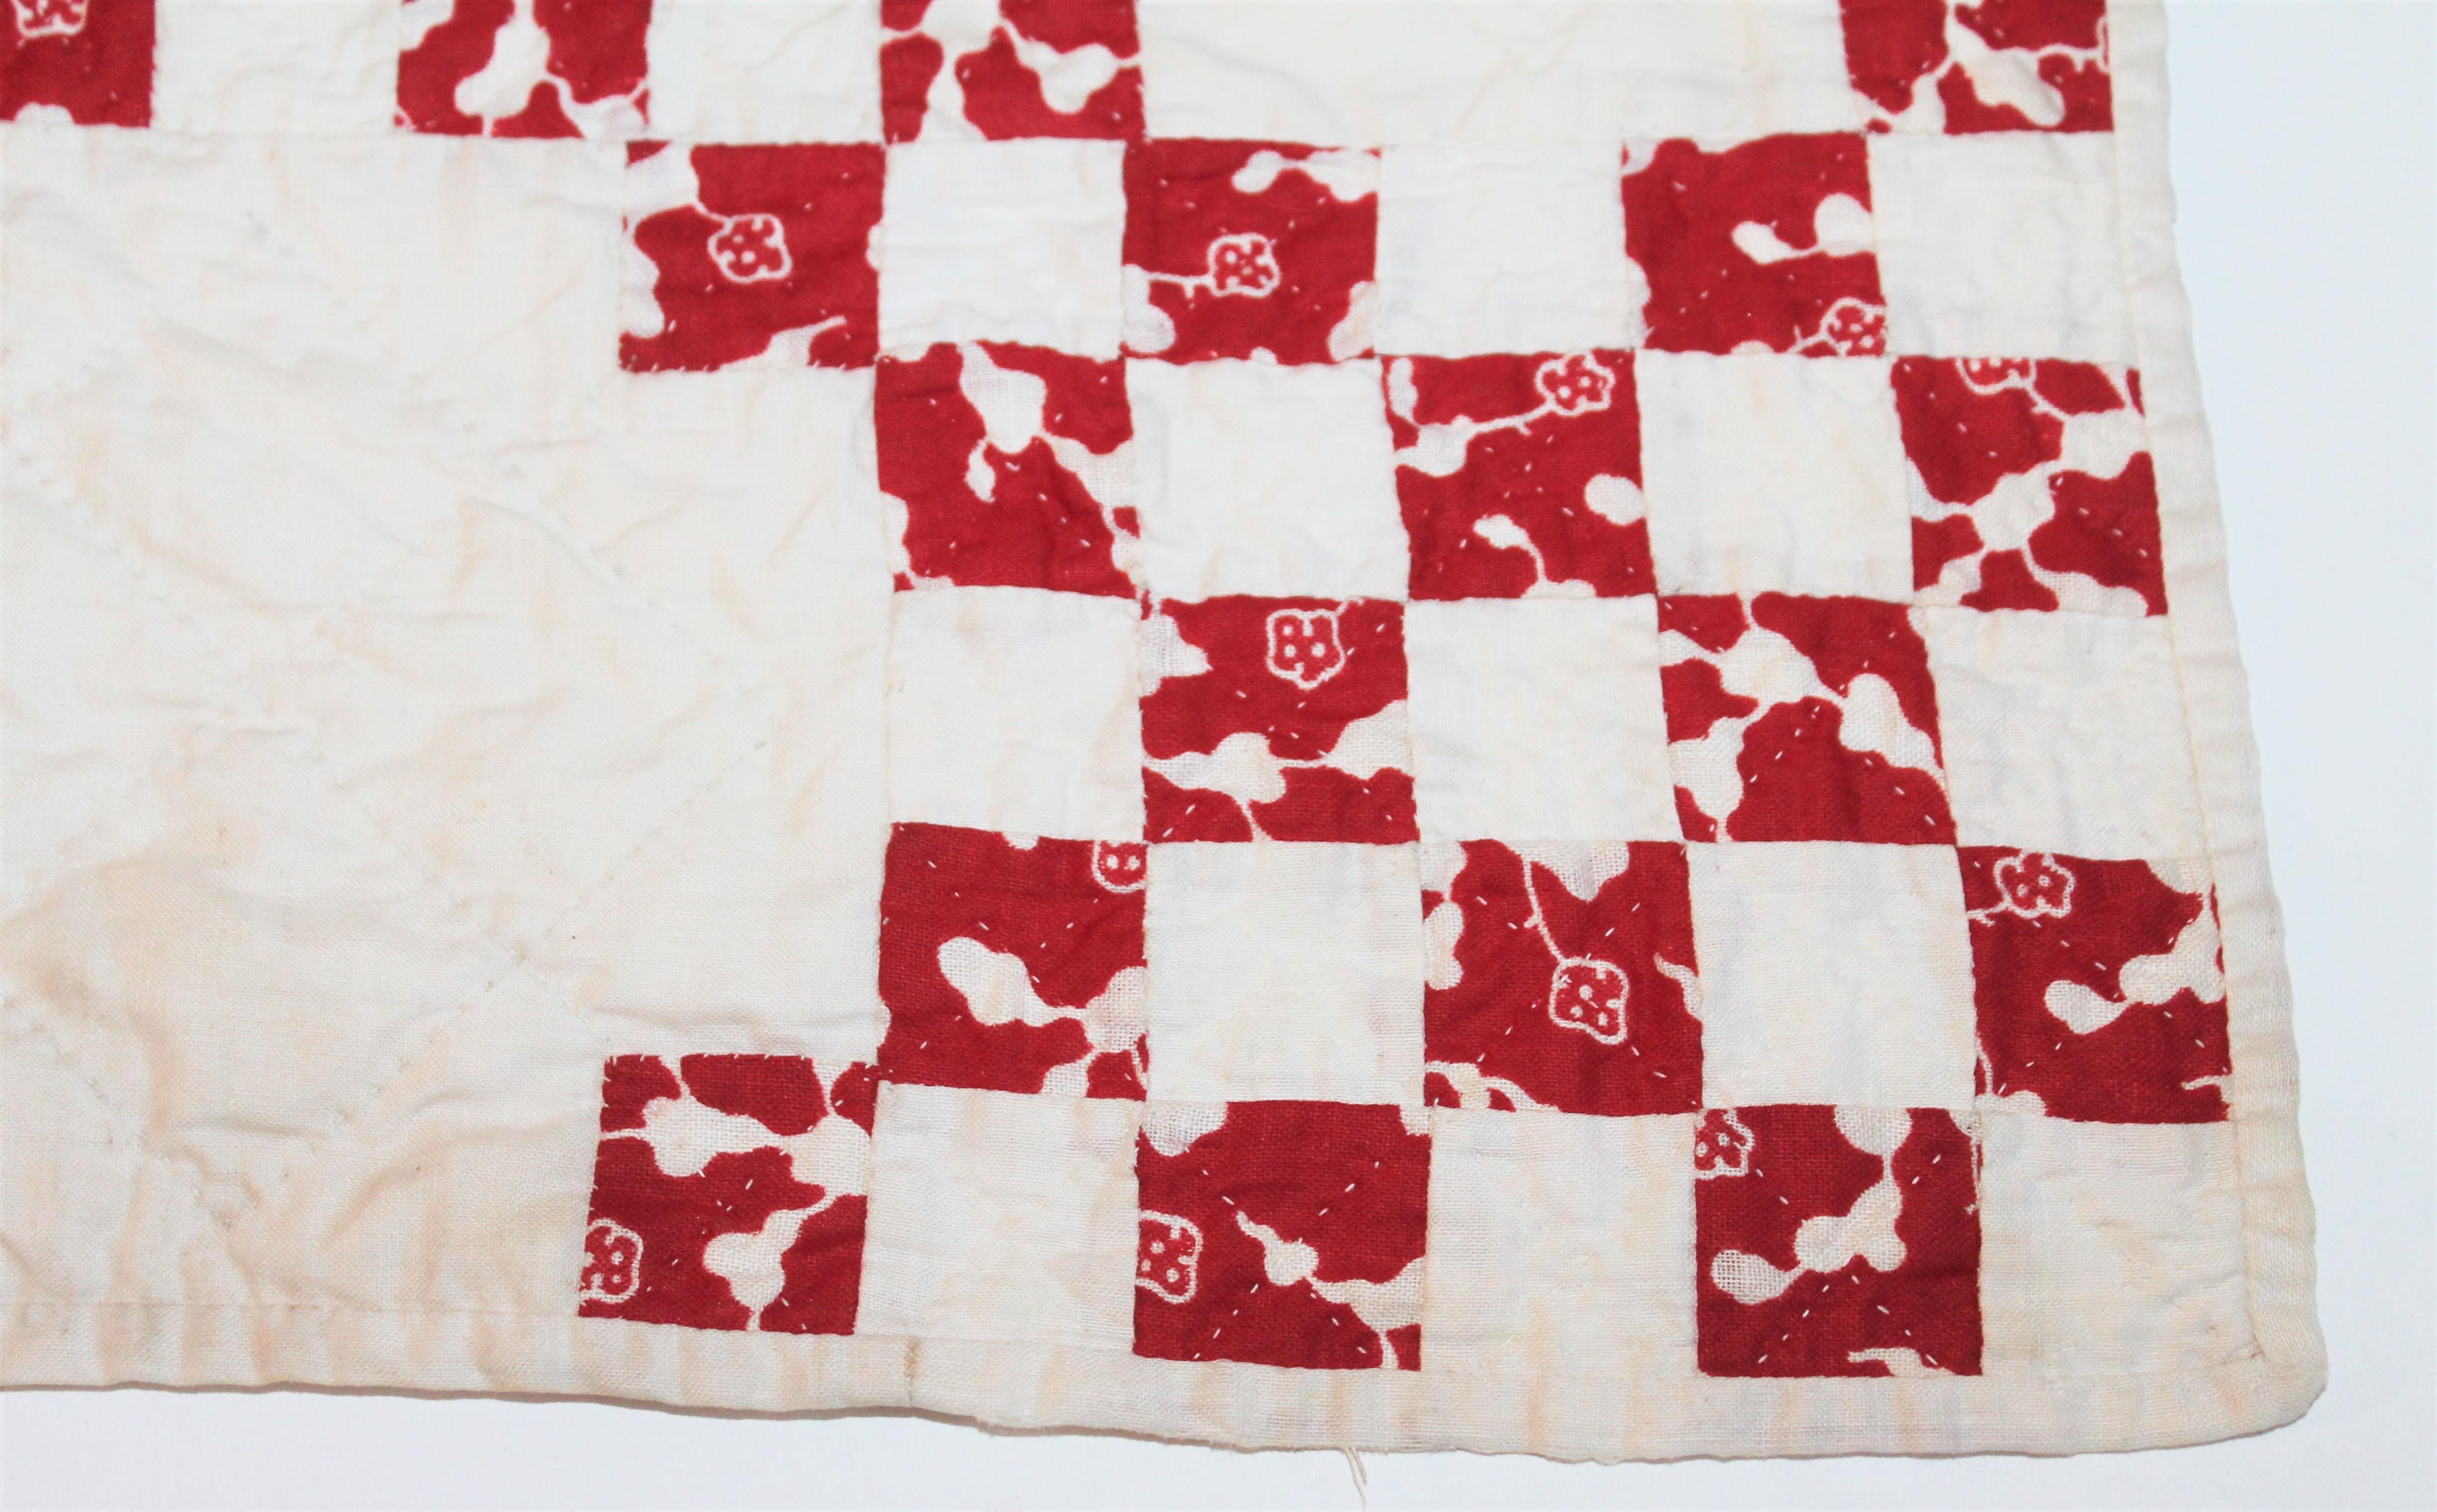 This fine early hand pieced and quilted tiny postage stamp crib quilt is for a new born baby. It is a real collectors dream as condition is mint! It was found in Berks County, Pennsylvania. It’s made in the late 19th century.